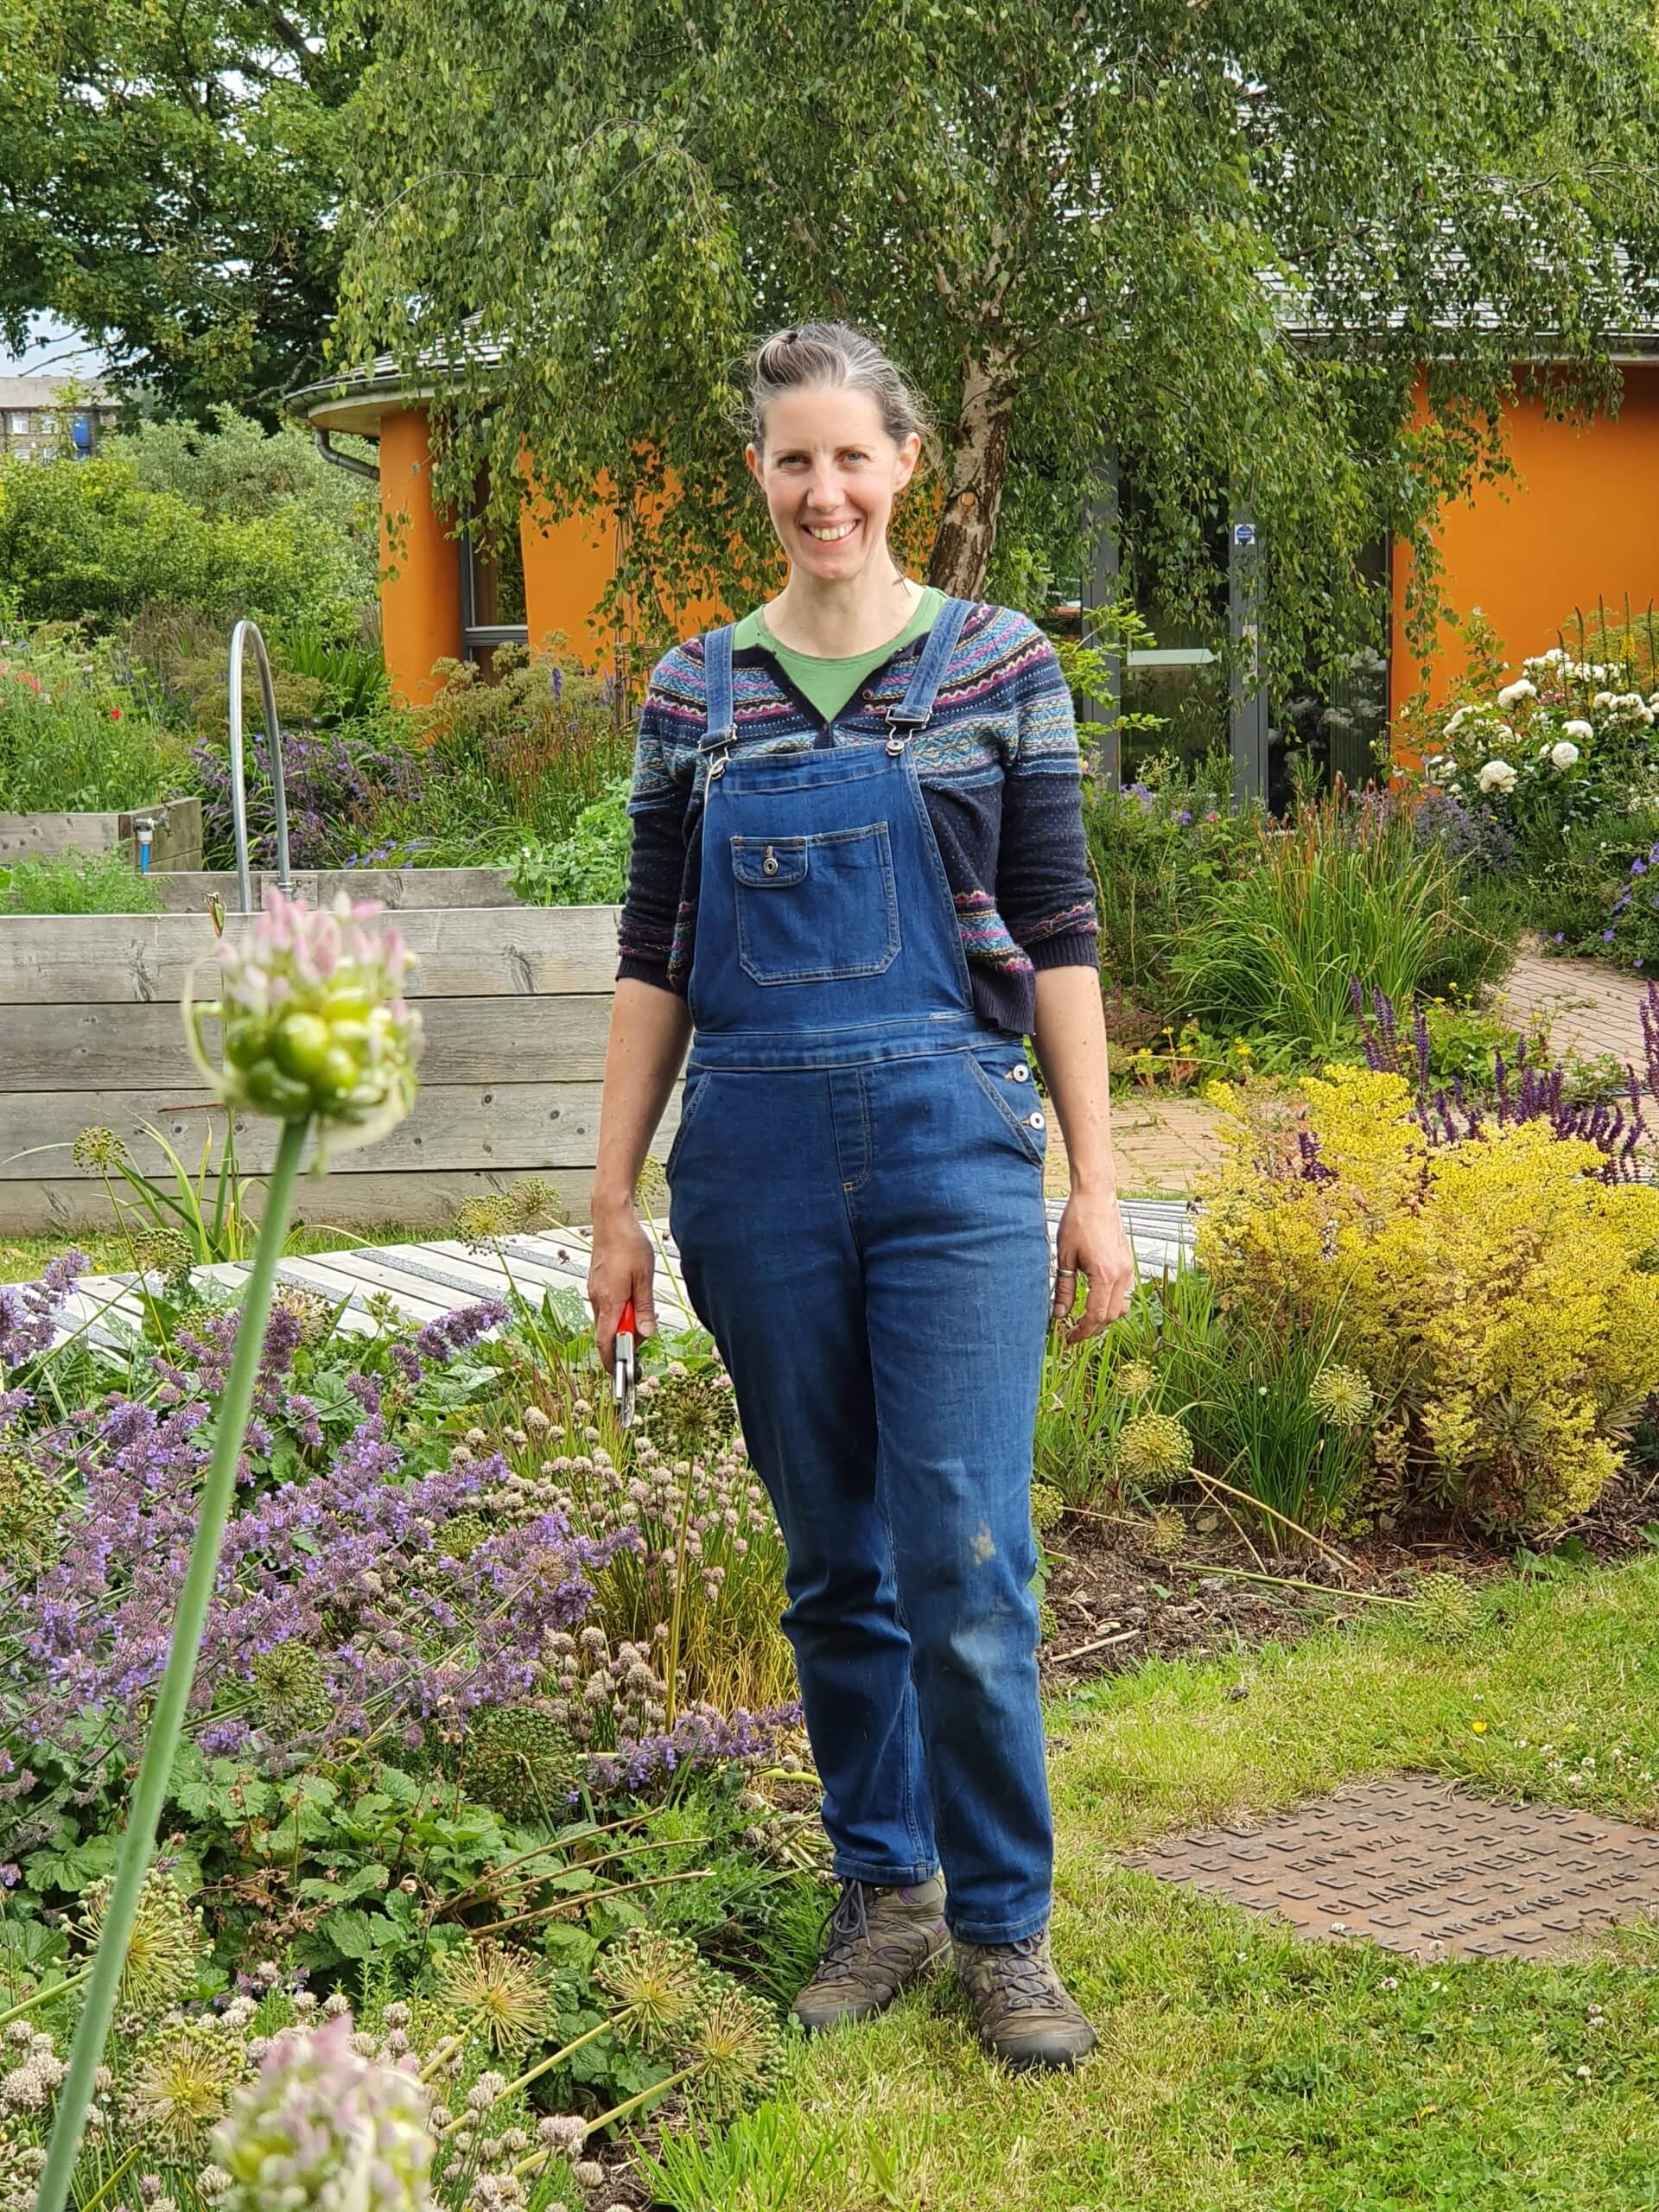 Ecology's Gardener Writes Permaculture Book - Ecology